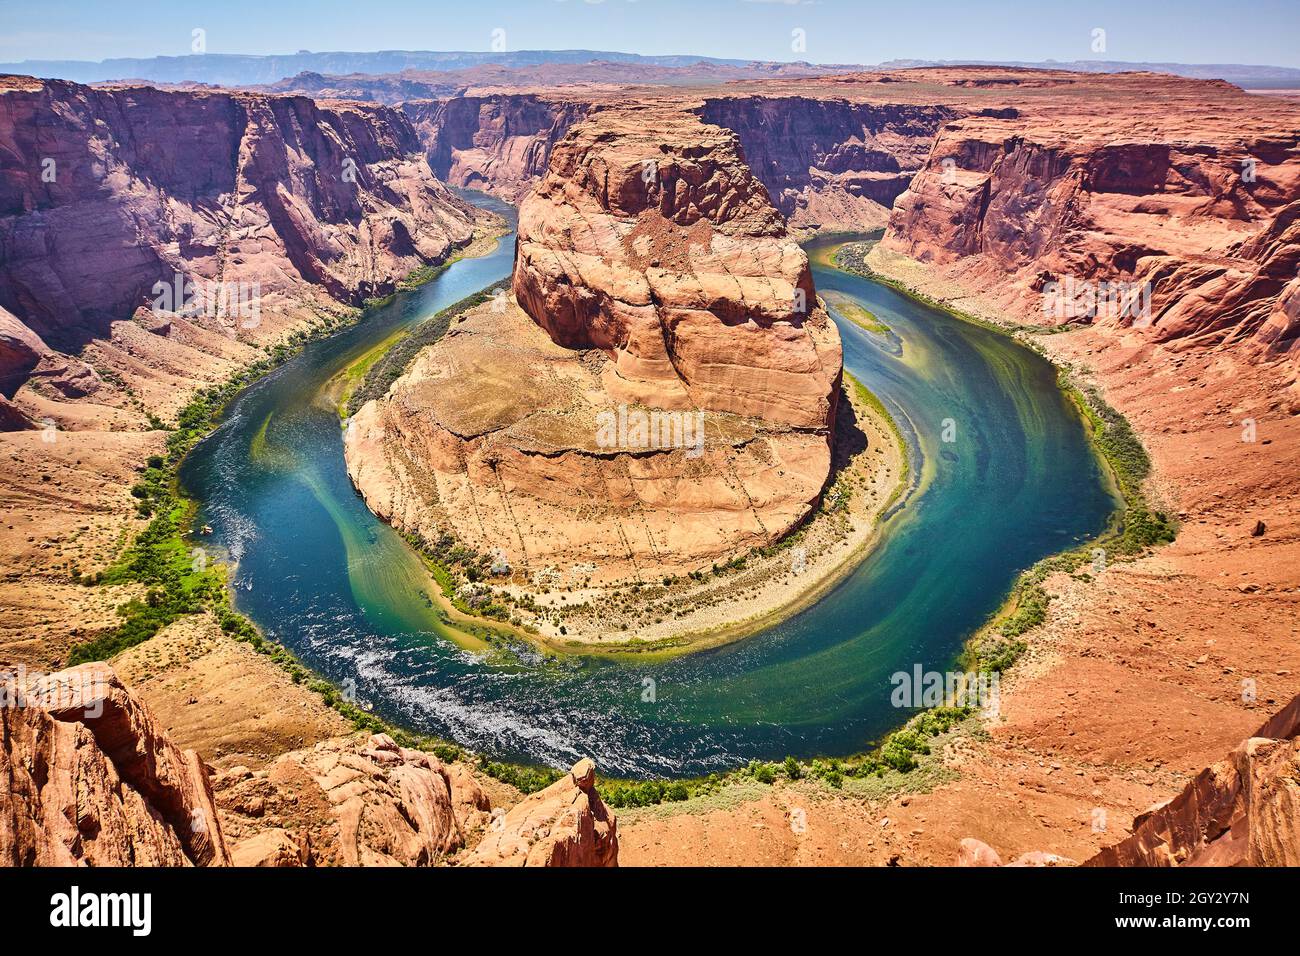 A horseshoe shaped river wrapping around a rocky outcropping Horseshoe ...